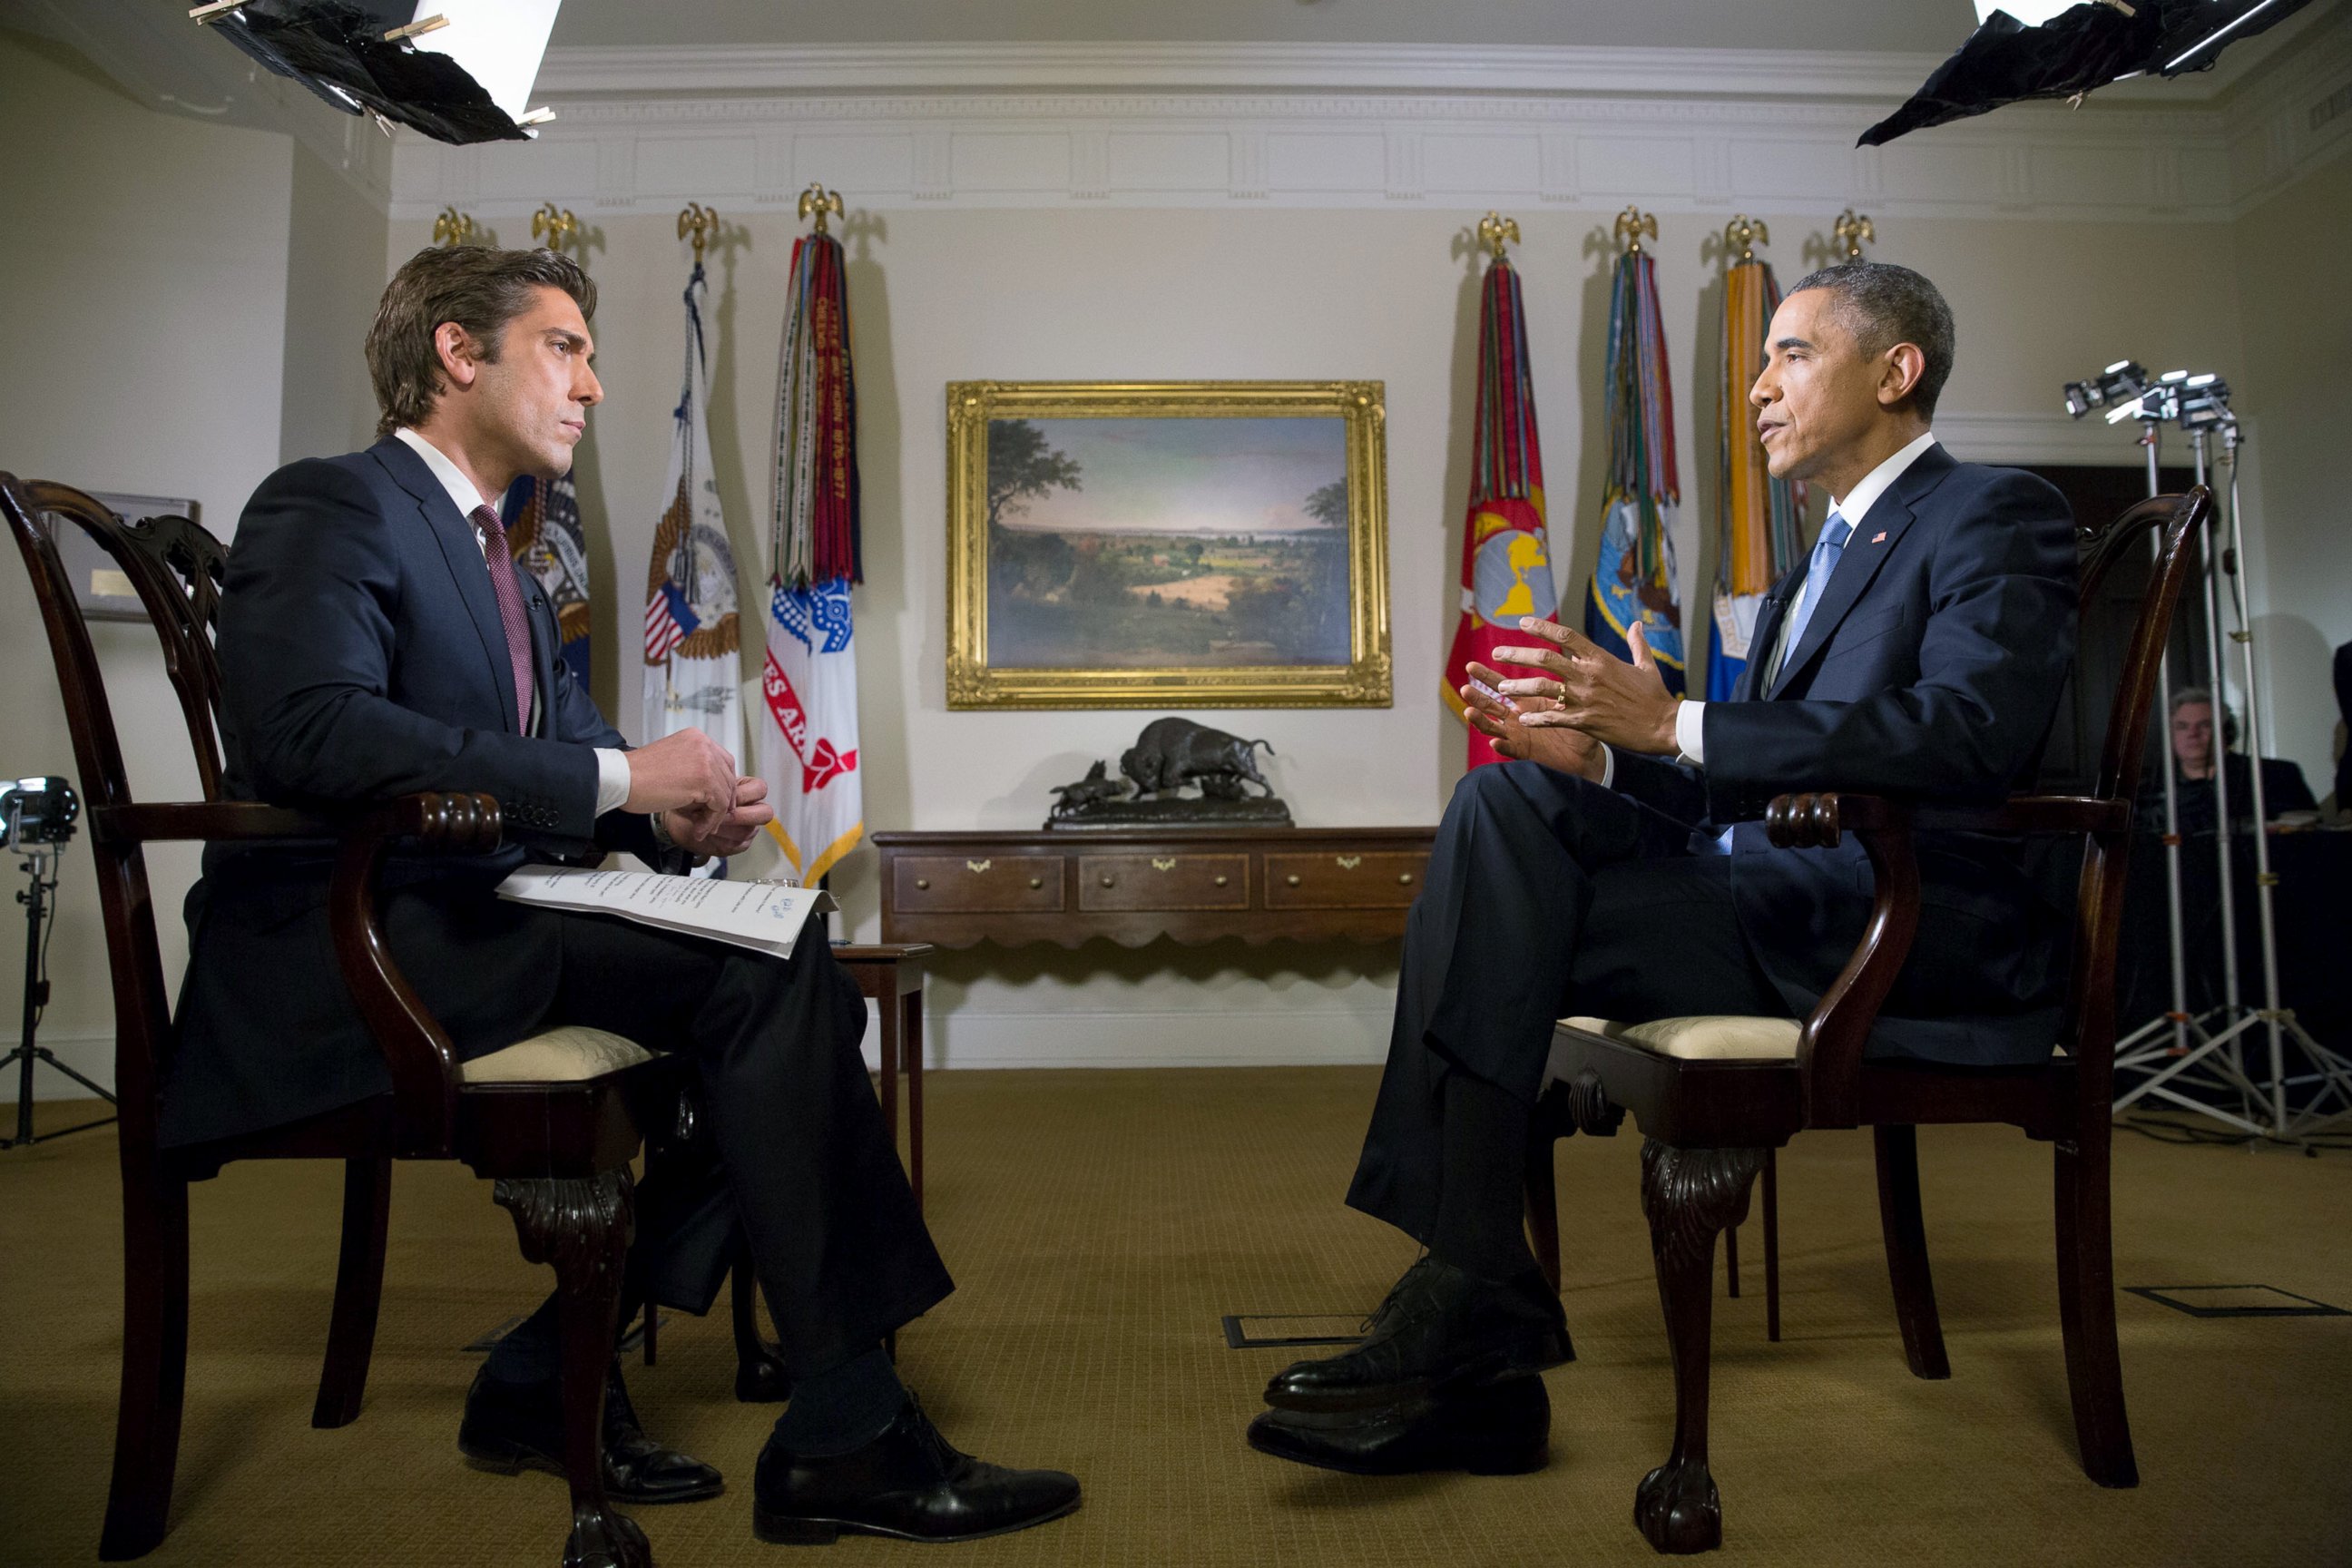 PHOTO: "World News Tonight" Anchor David Muir's exclusive interview with President Obama on the normalization of relations with Cuba in 2014.